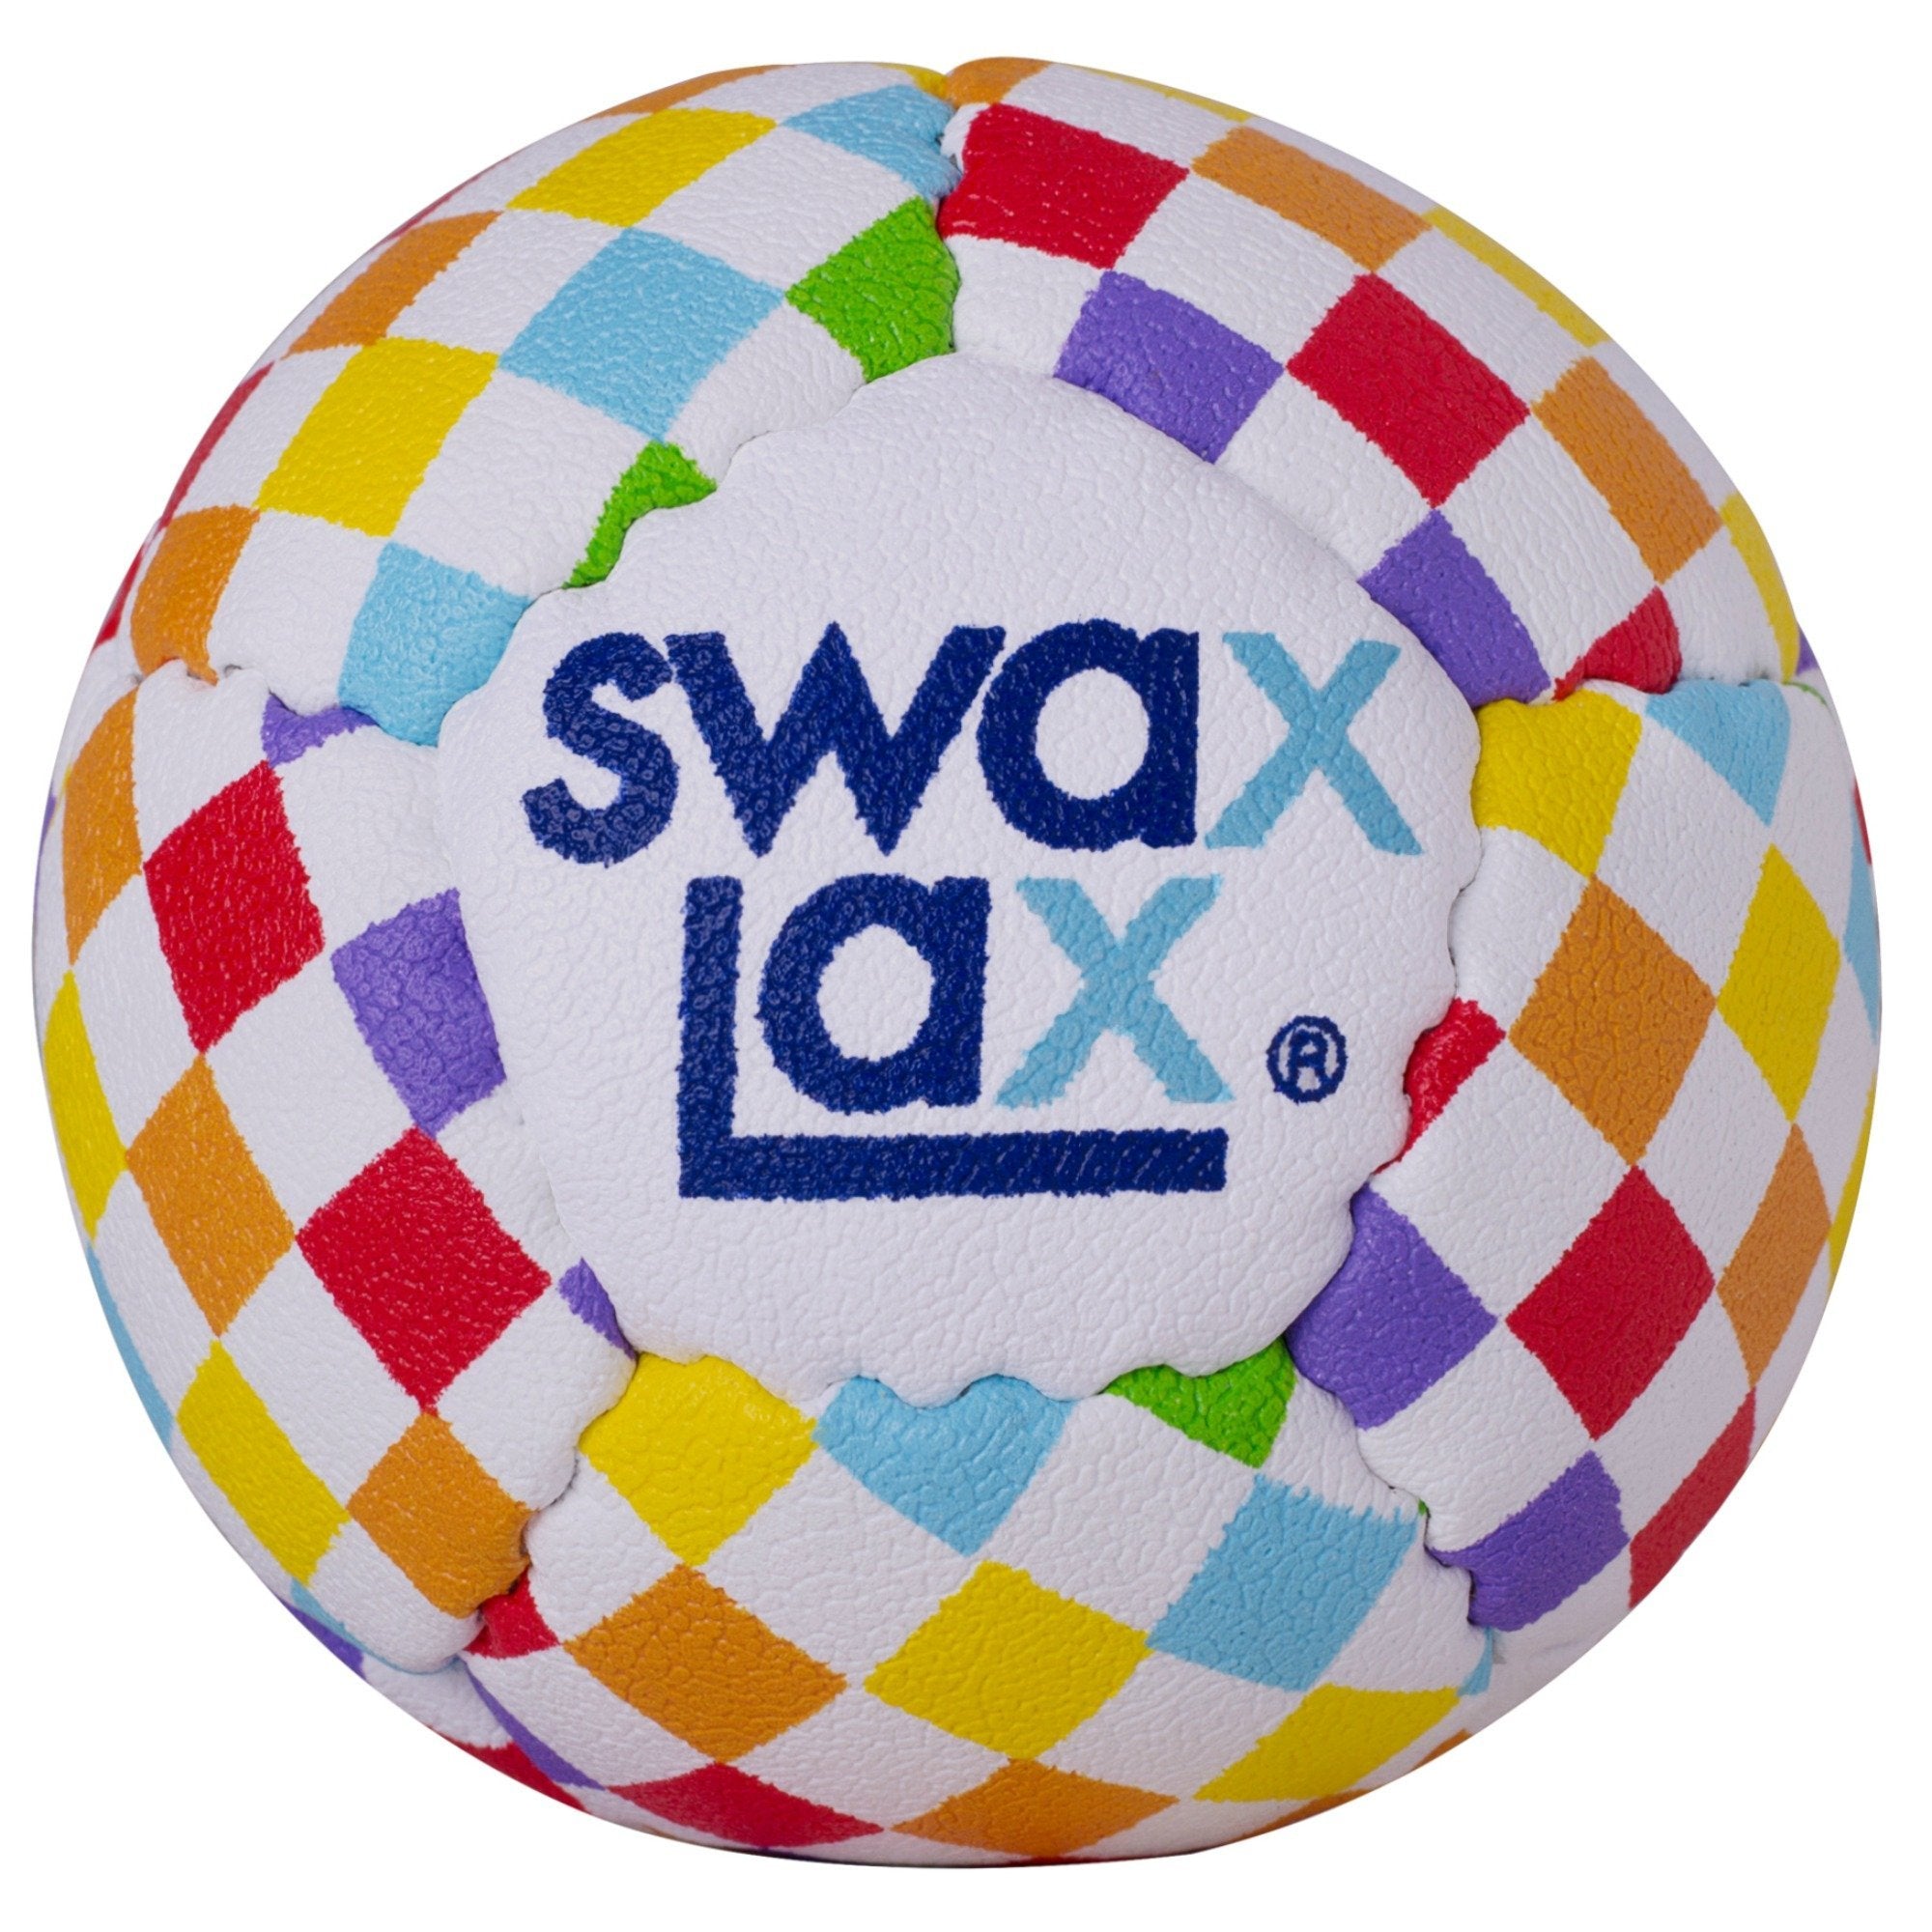 Swax Lax lacrosse training ball - Rainbow Check pattern - front view